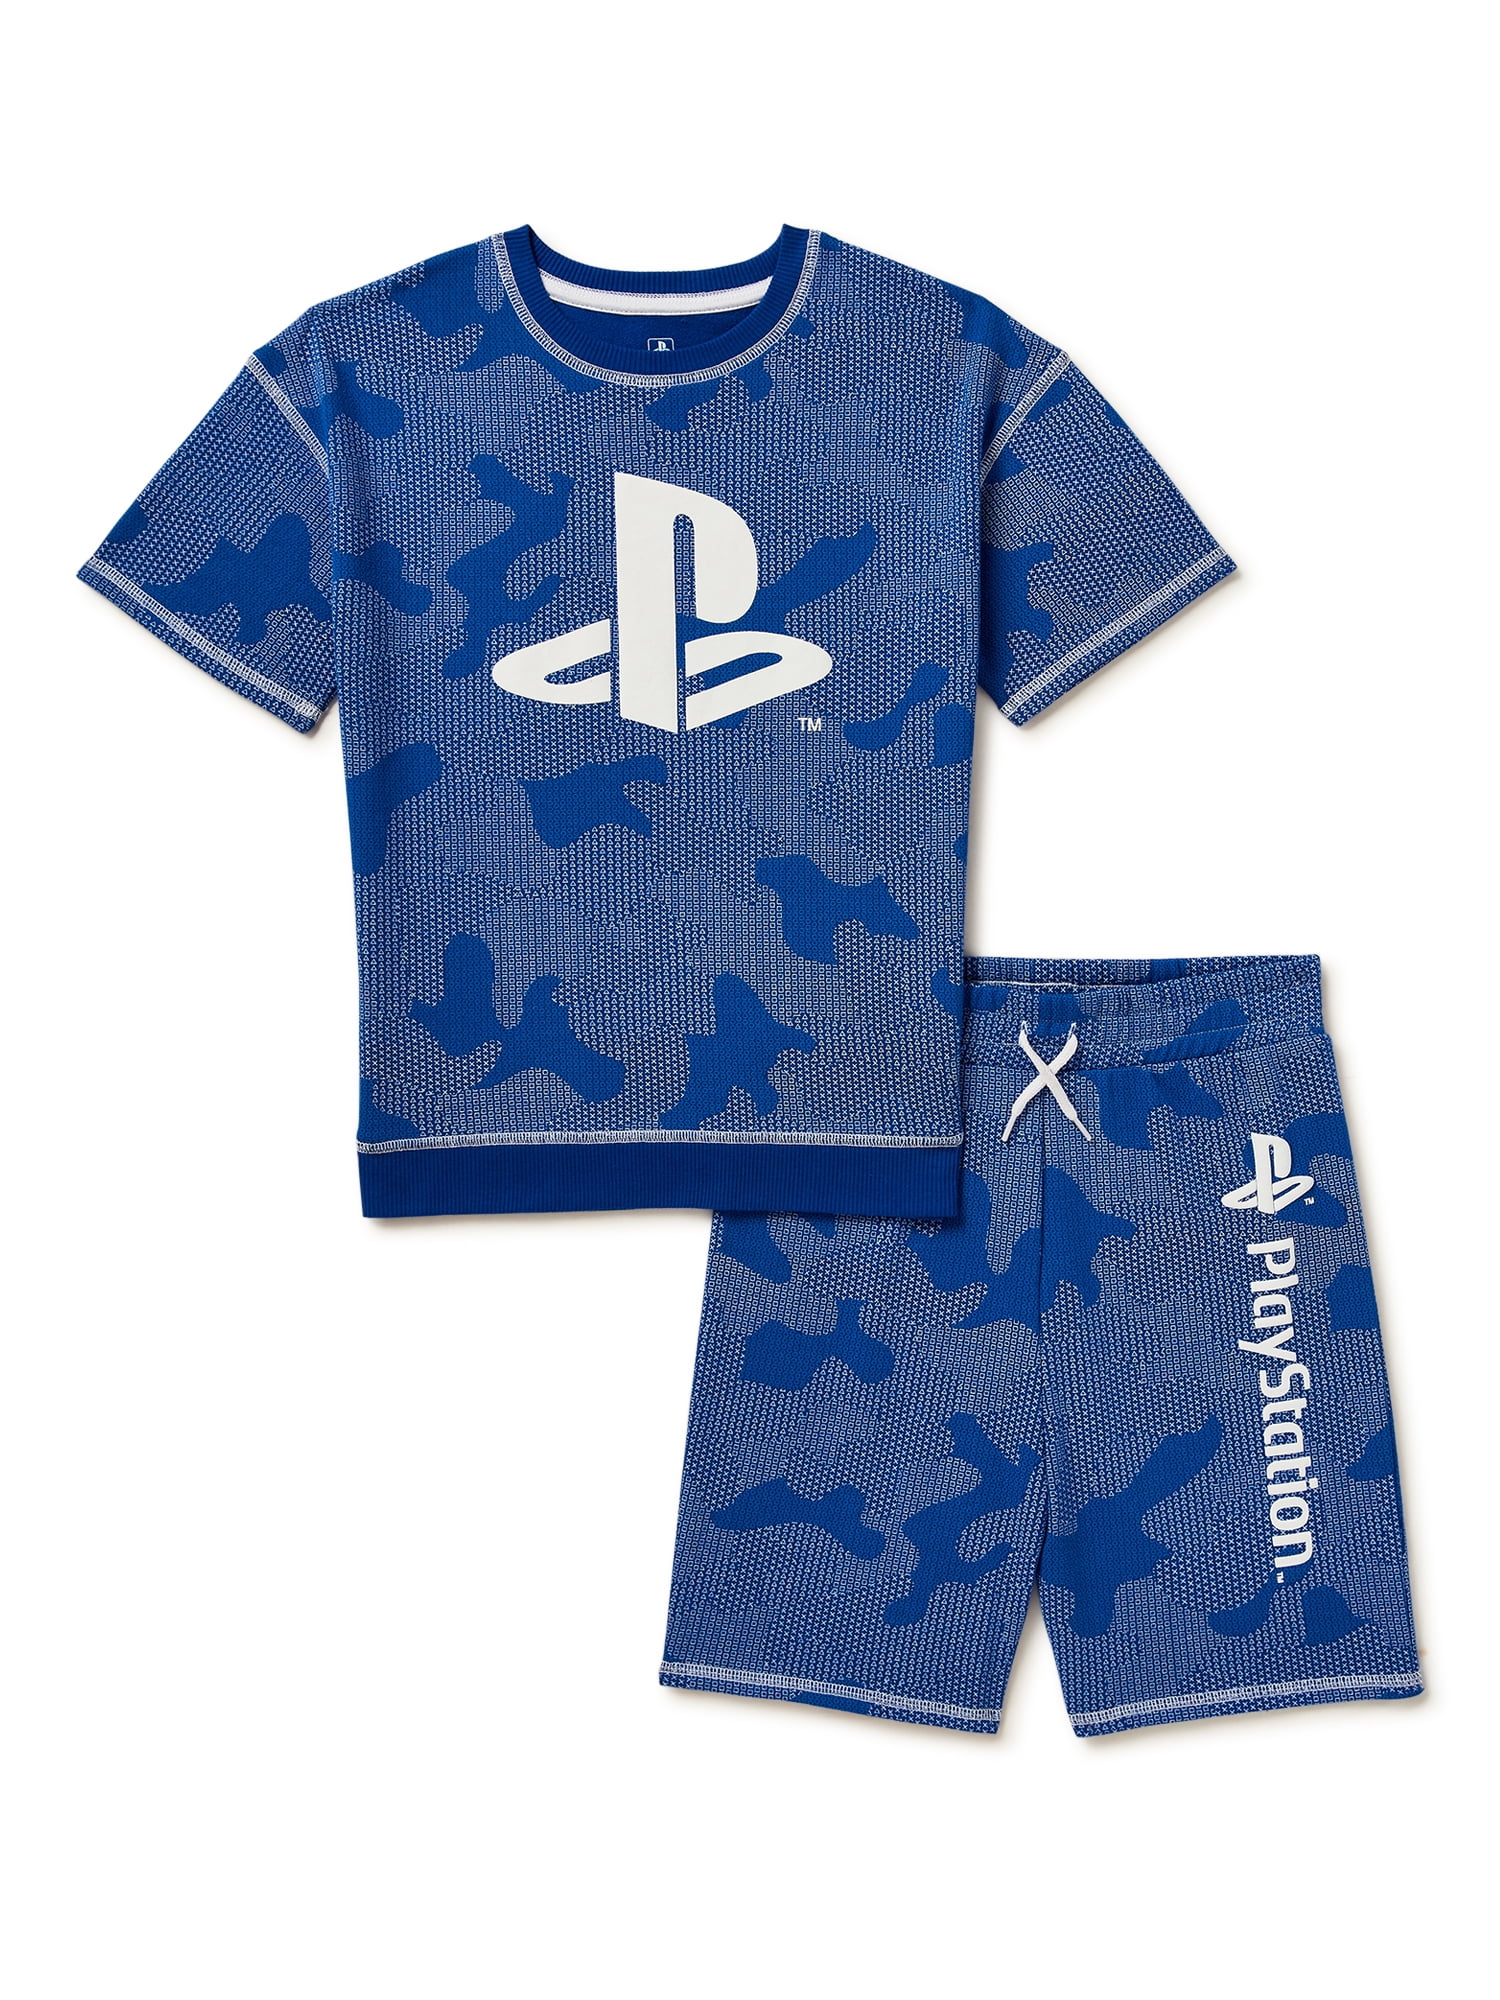 PlayStation Boys Camo Graphic Top and Short Set, 2-Piece, Sizes 4-10